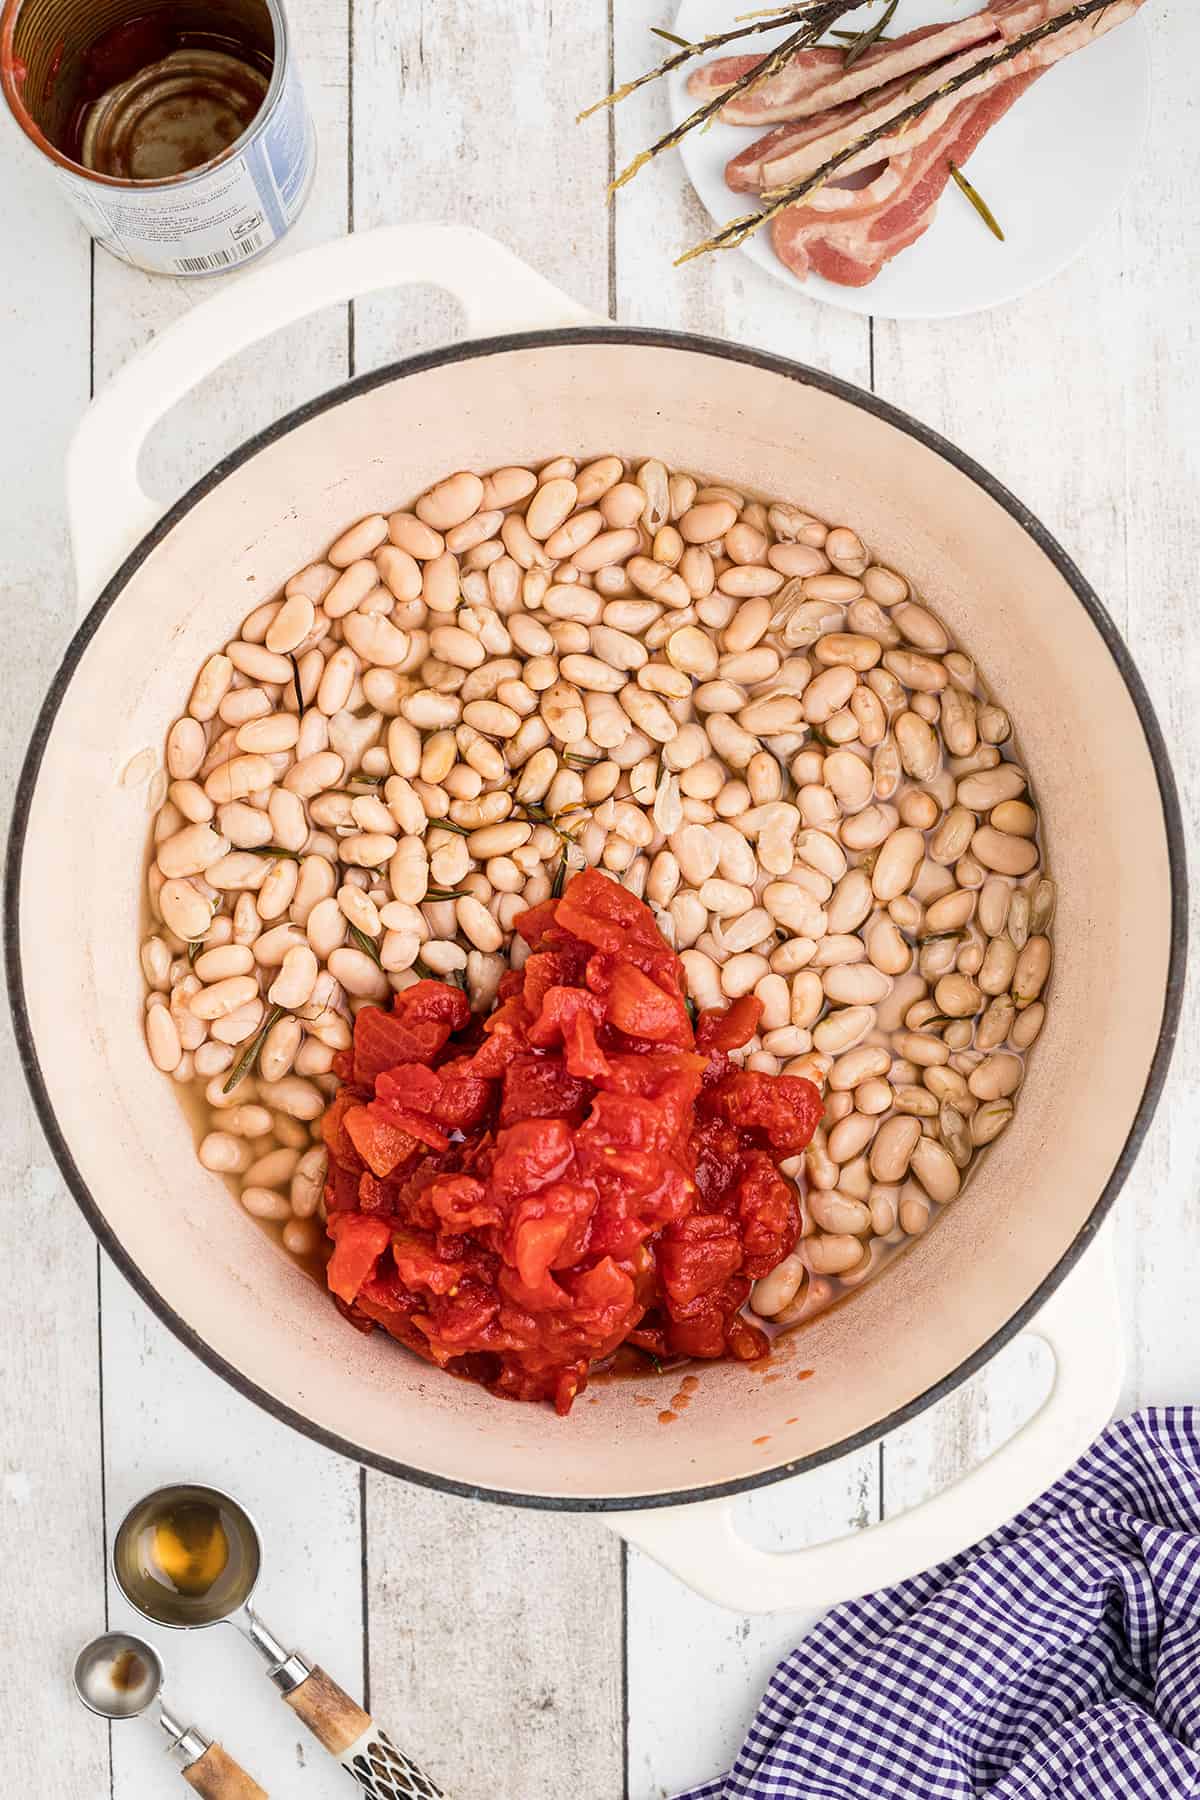 Tomatoes and remaining ingredients added to partially cooked beans.